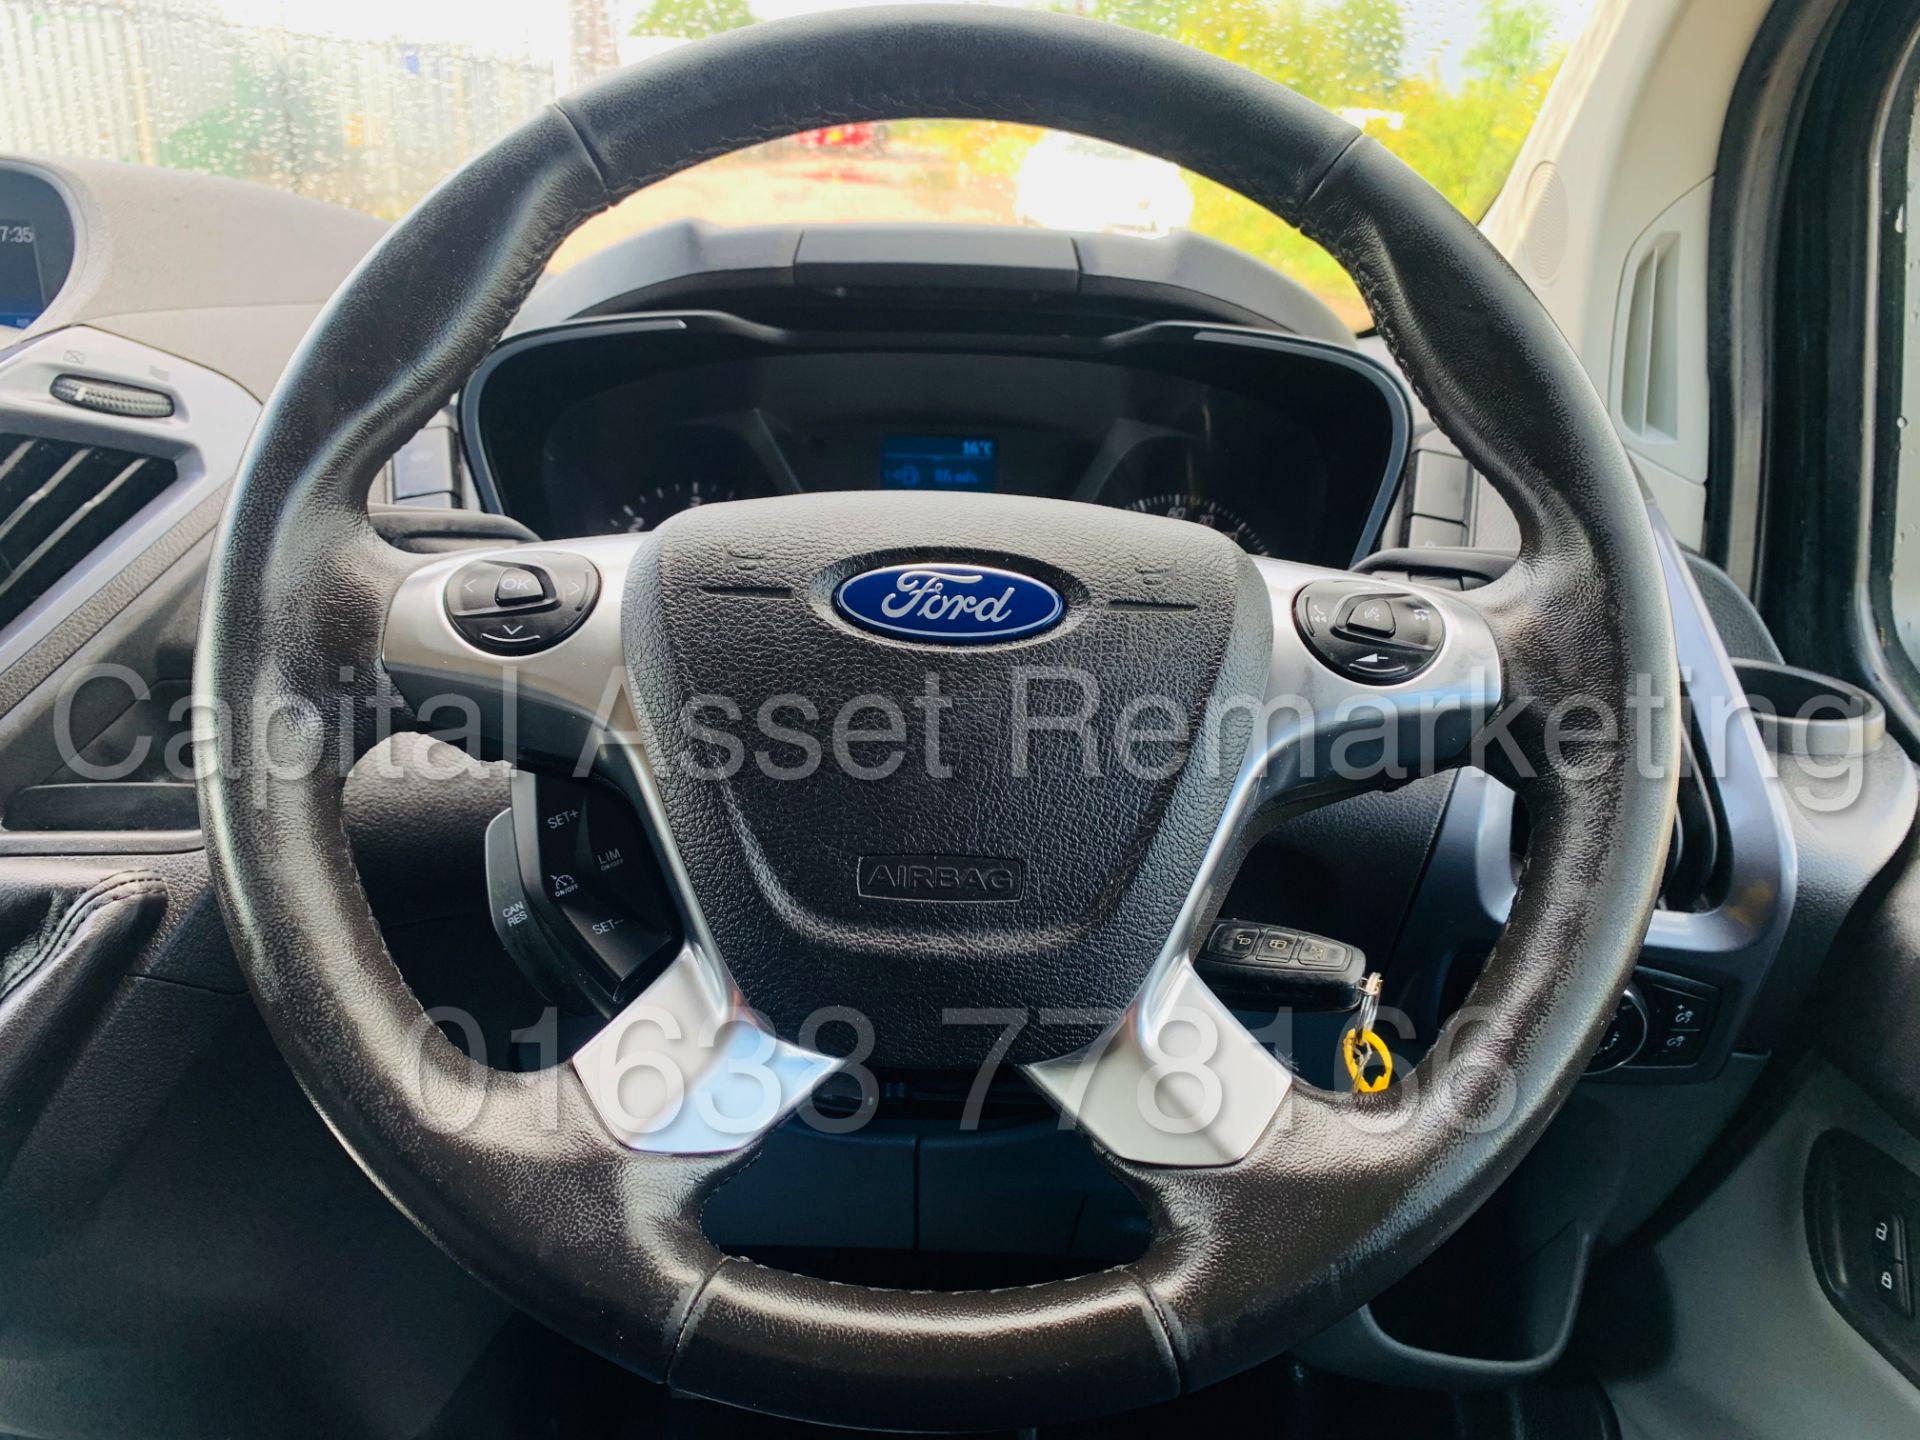 (On Sale) FORD TRANSIT CUSTOM *LIMITED* (2018 - EURO 6) '2.0 TDCI - 130 BHP - 6 SPEED' **LOW MILES** - Image 42 of 44